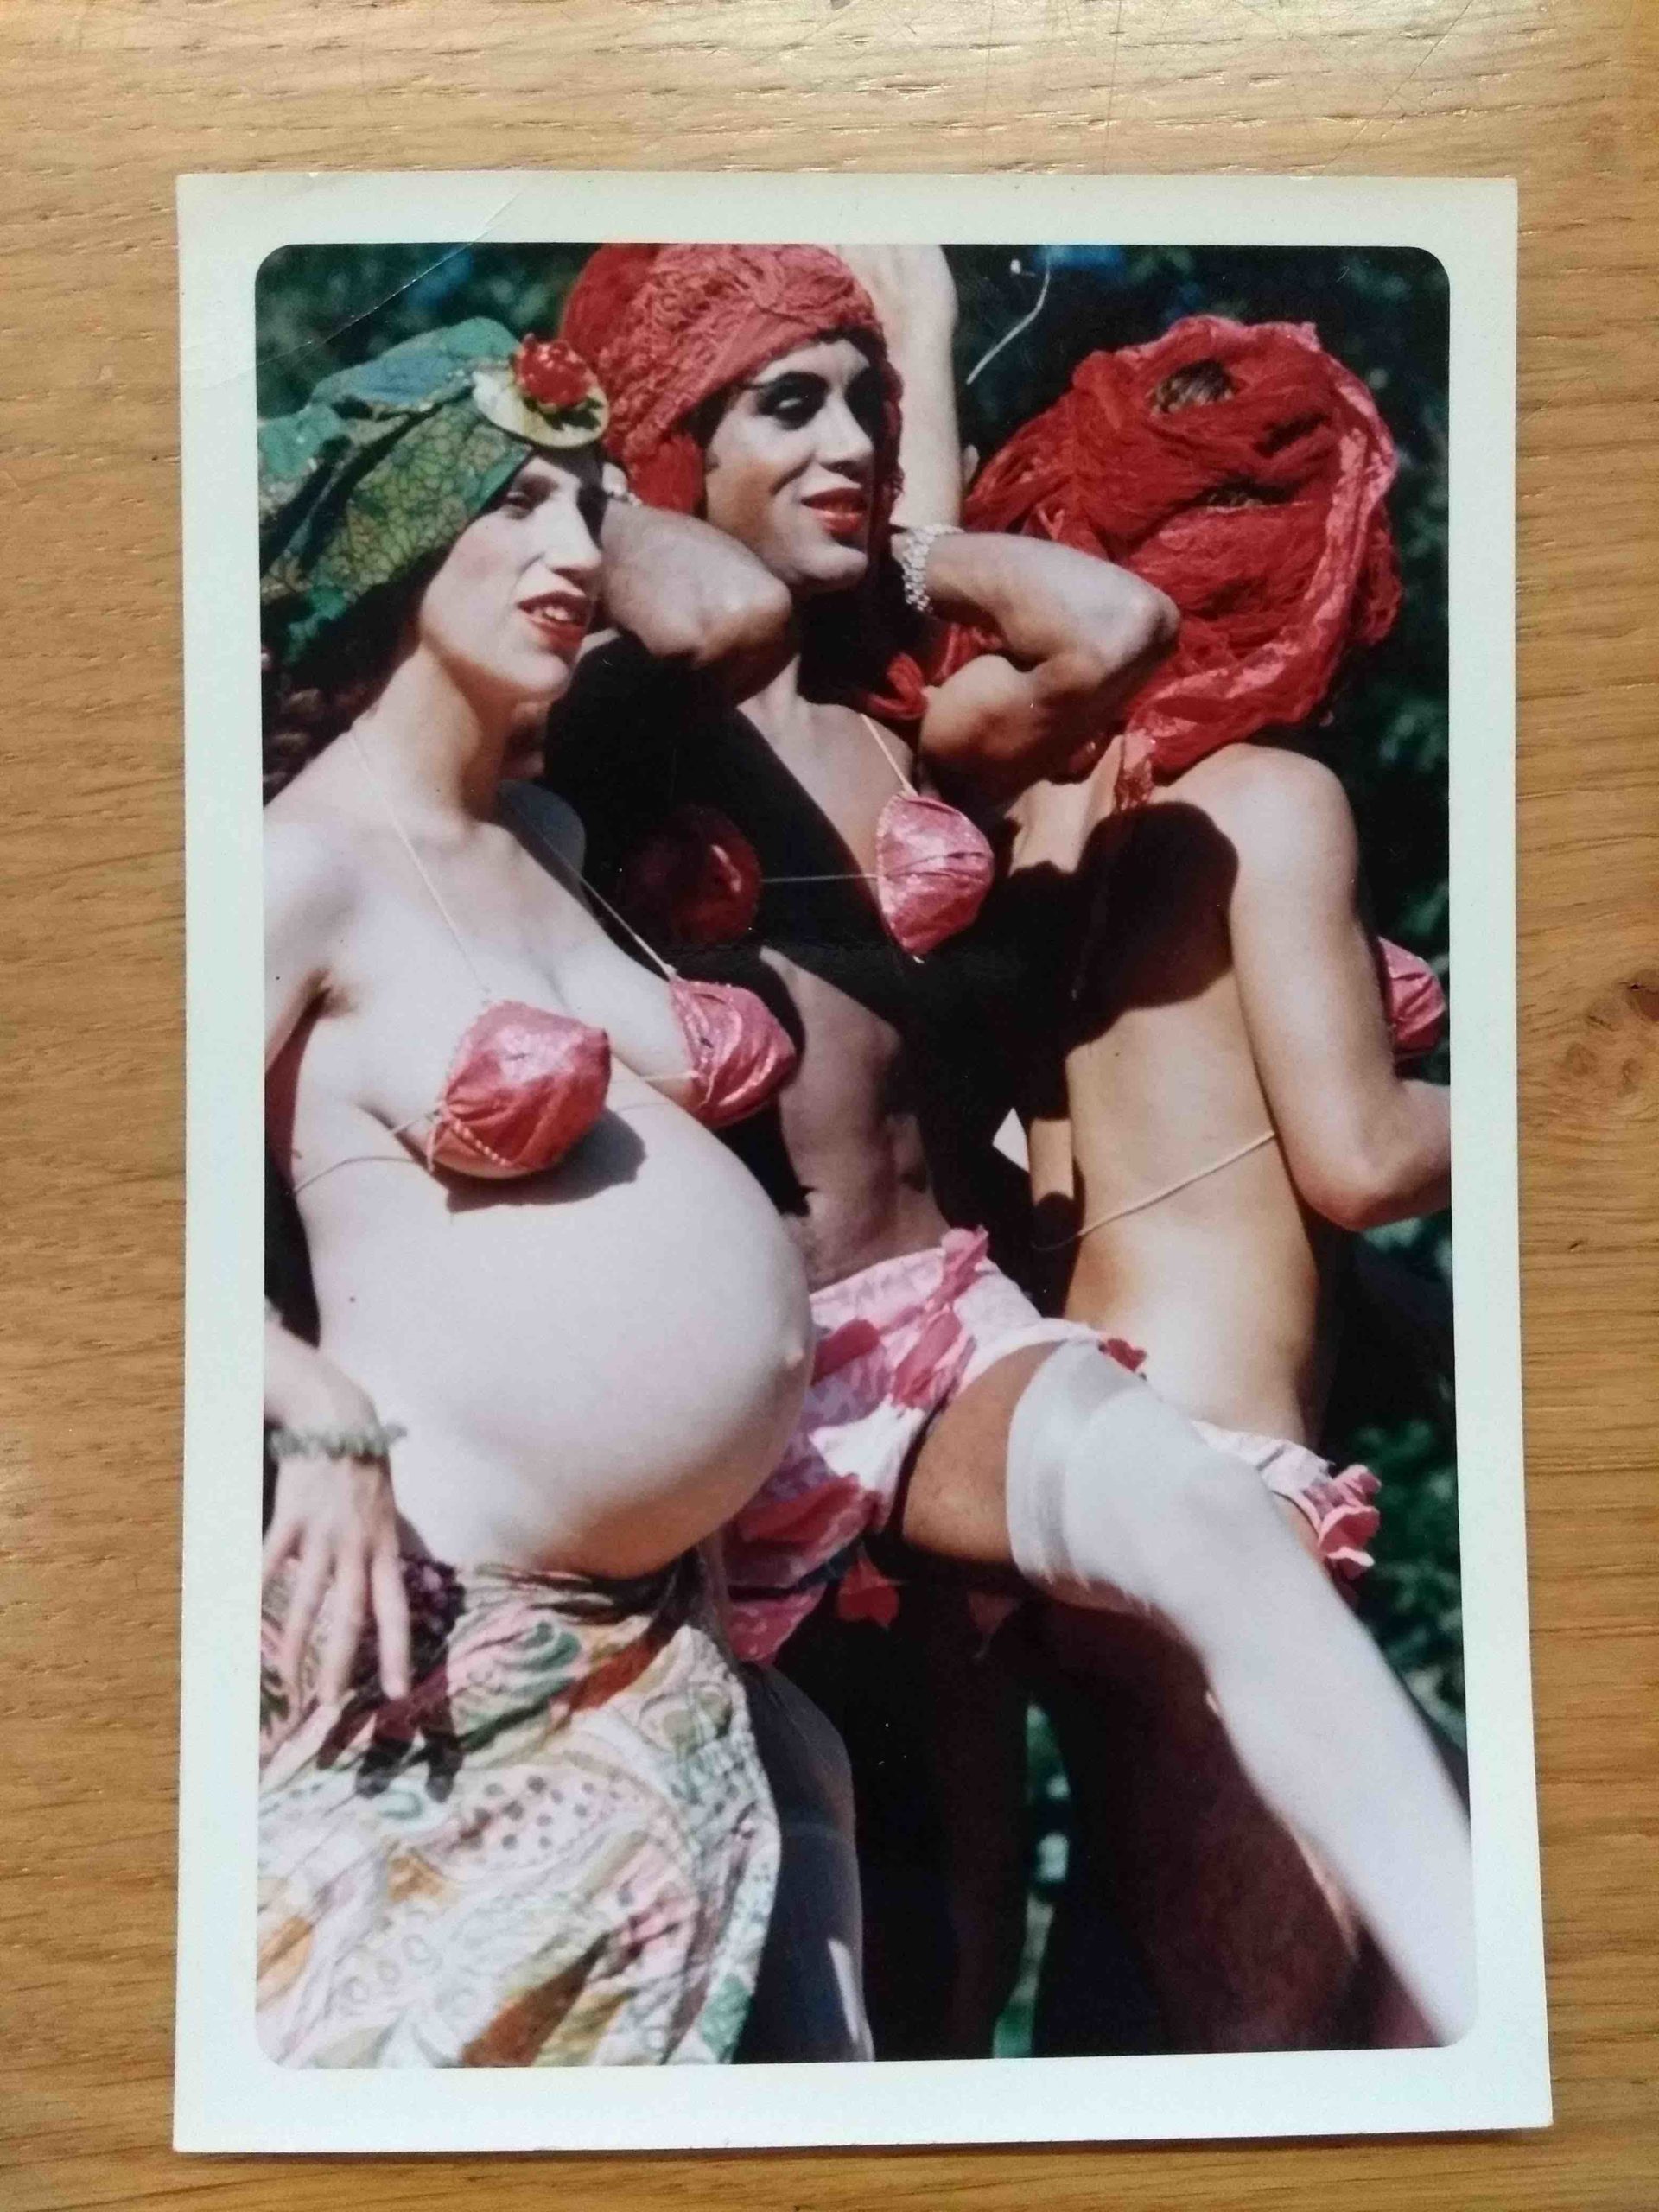 A color photograph placed on a wooden surface. The photo captures three bodies all in bikini tops and elaborate head pieces. The one on the very left is heavily pregnant